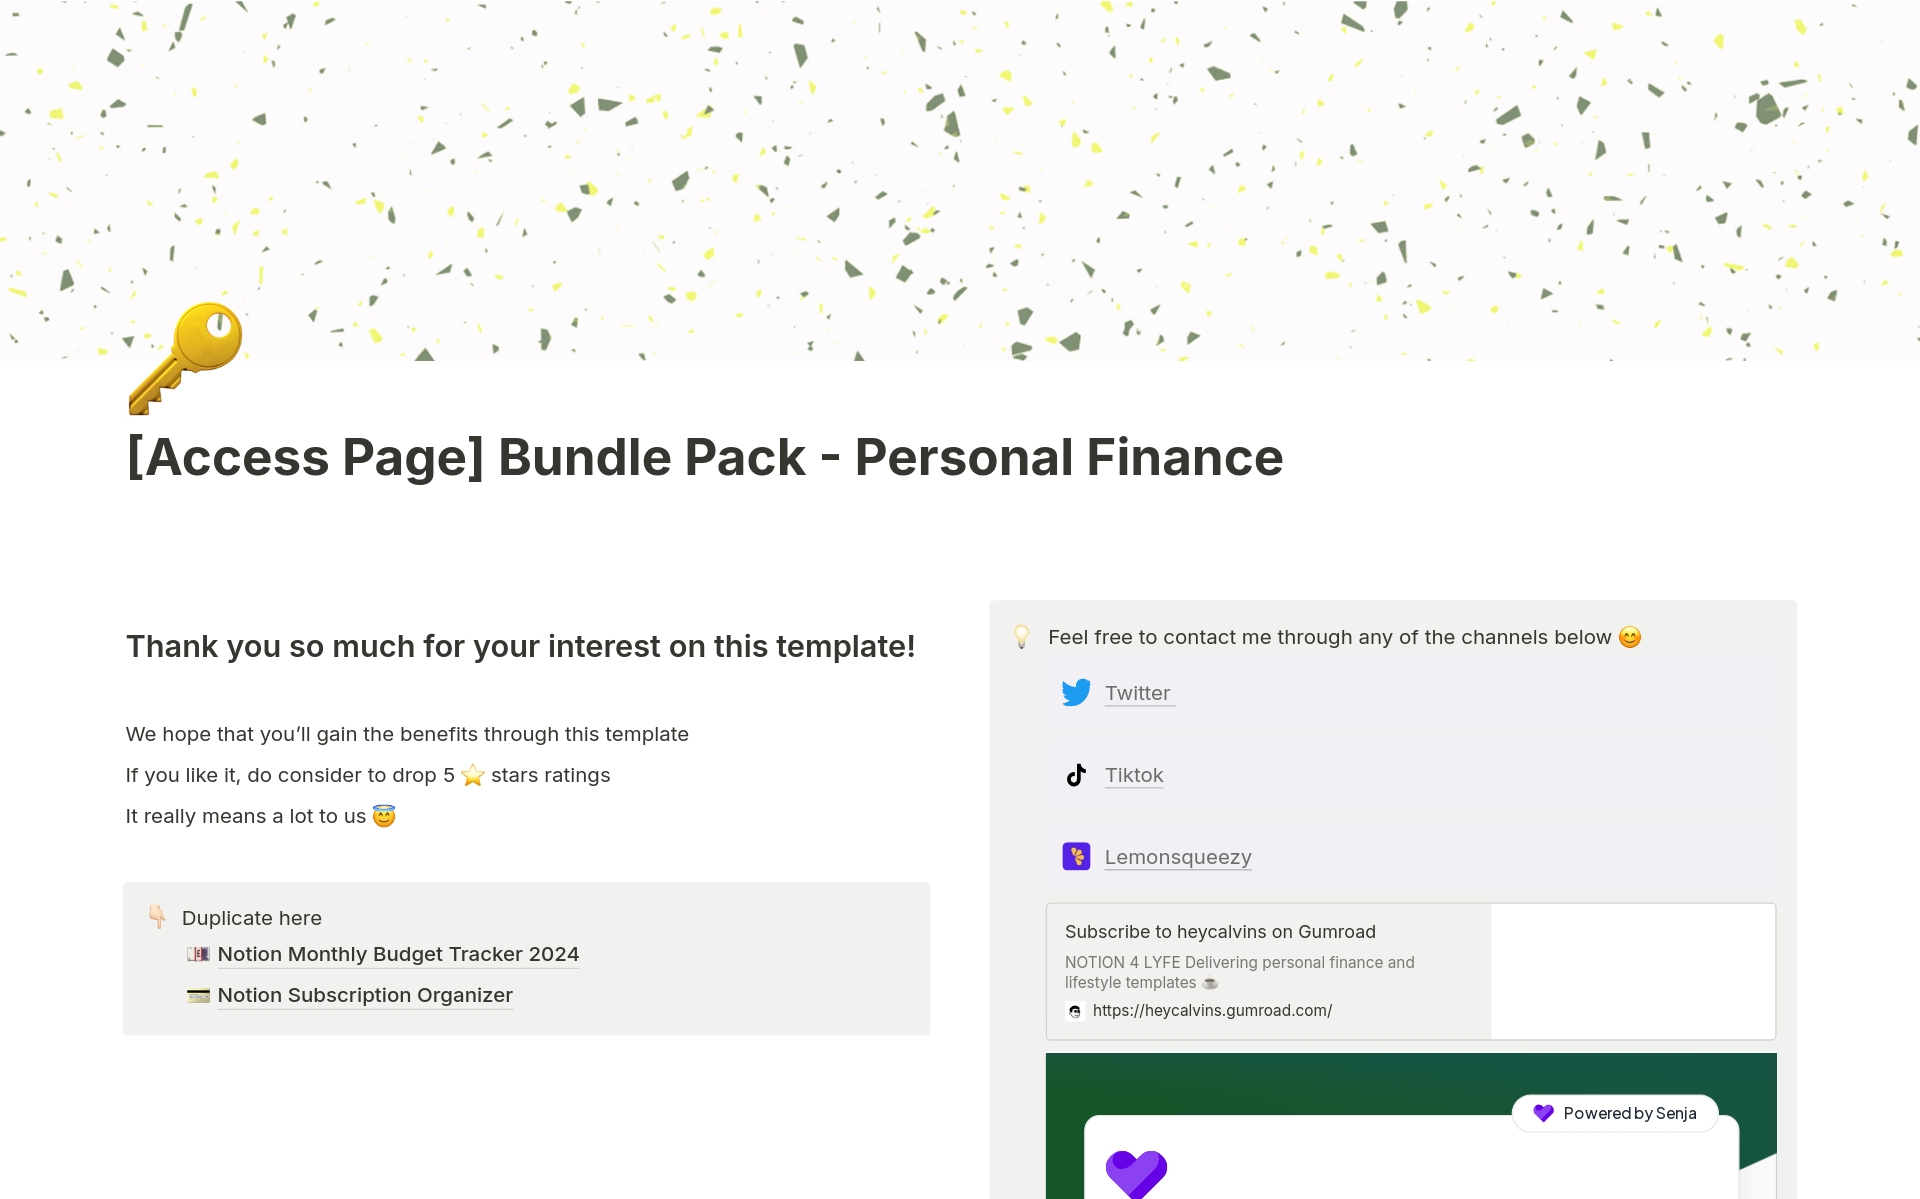 Bundle Pack Content:
• Notion Monthly Budget Tracker 2024 Template (Worth $7)
• Notion Subscription Organizer Template (Worth $5)